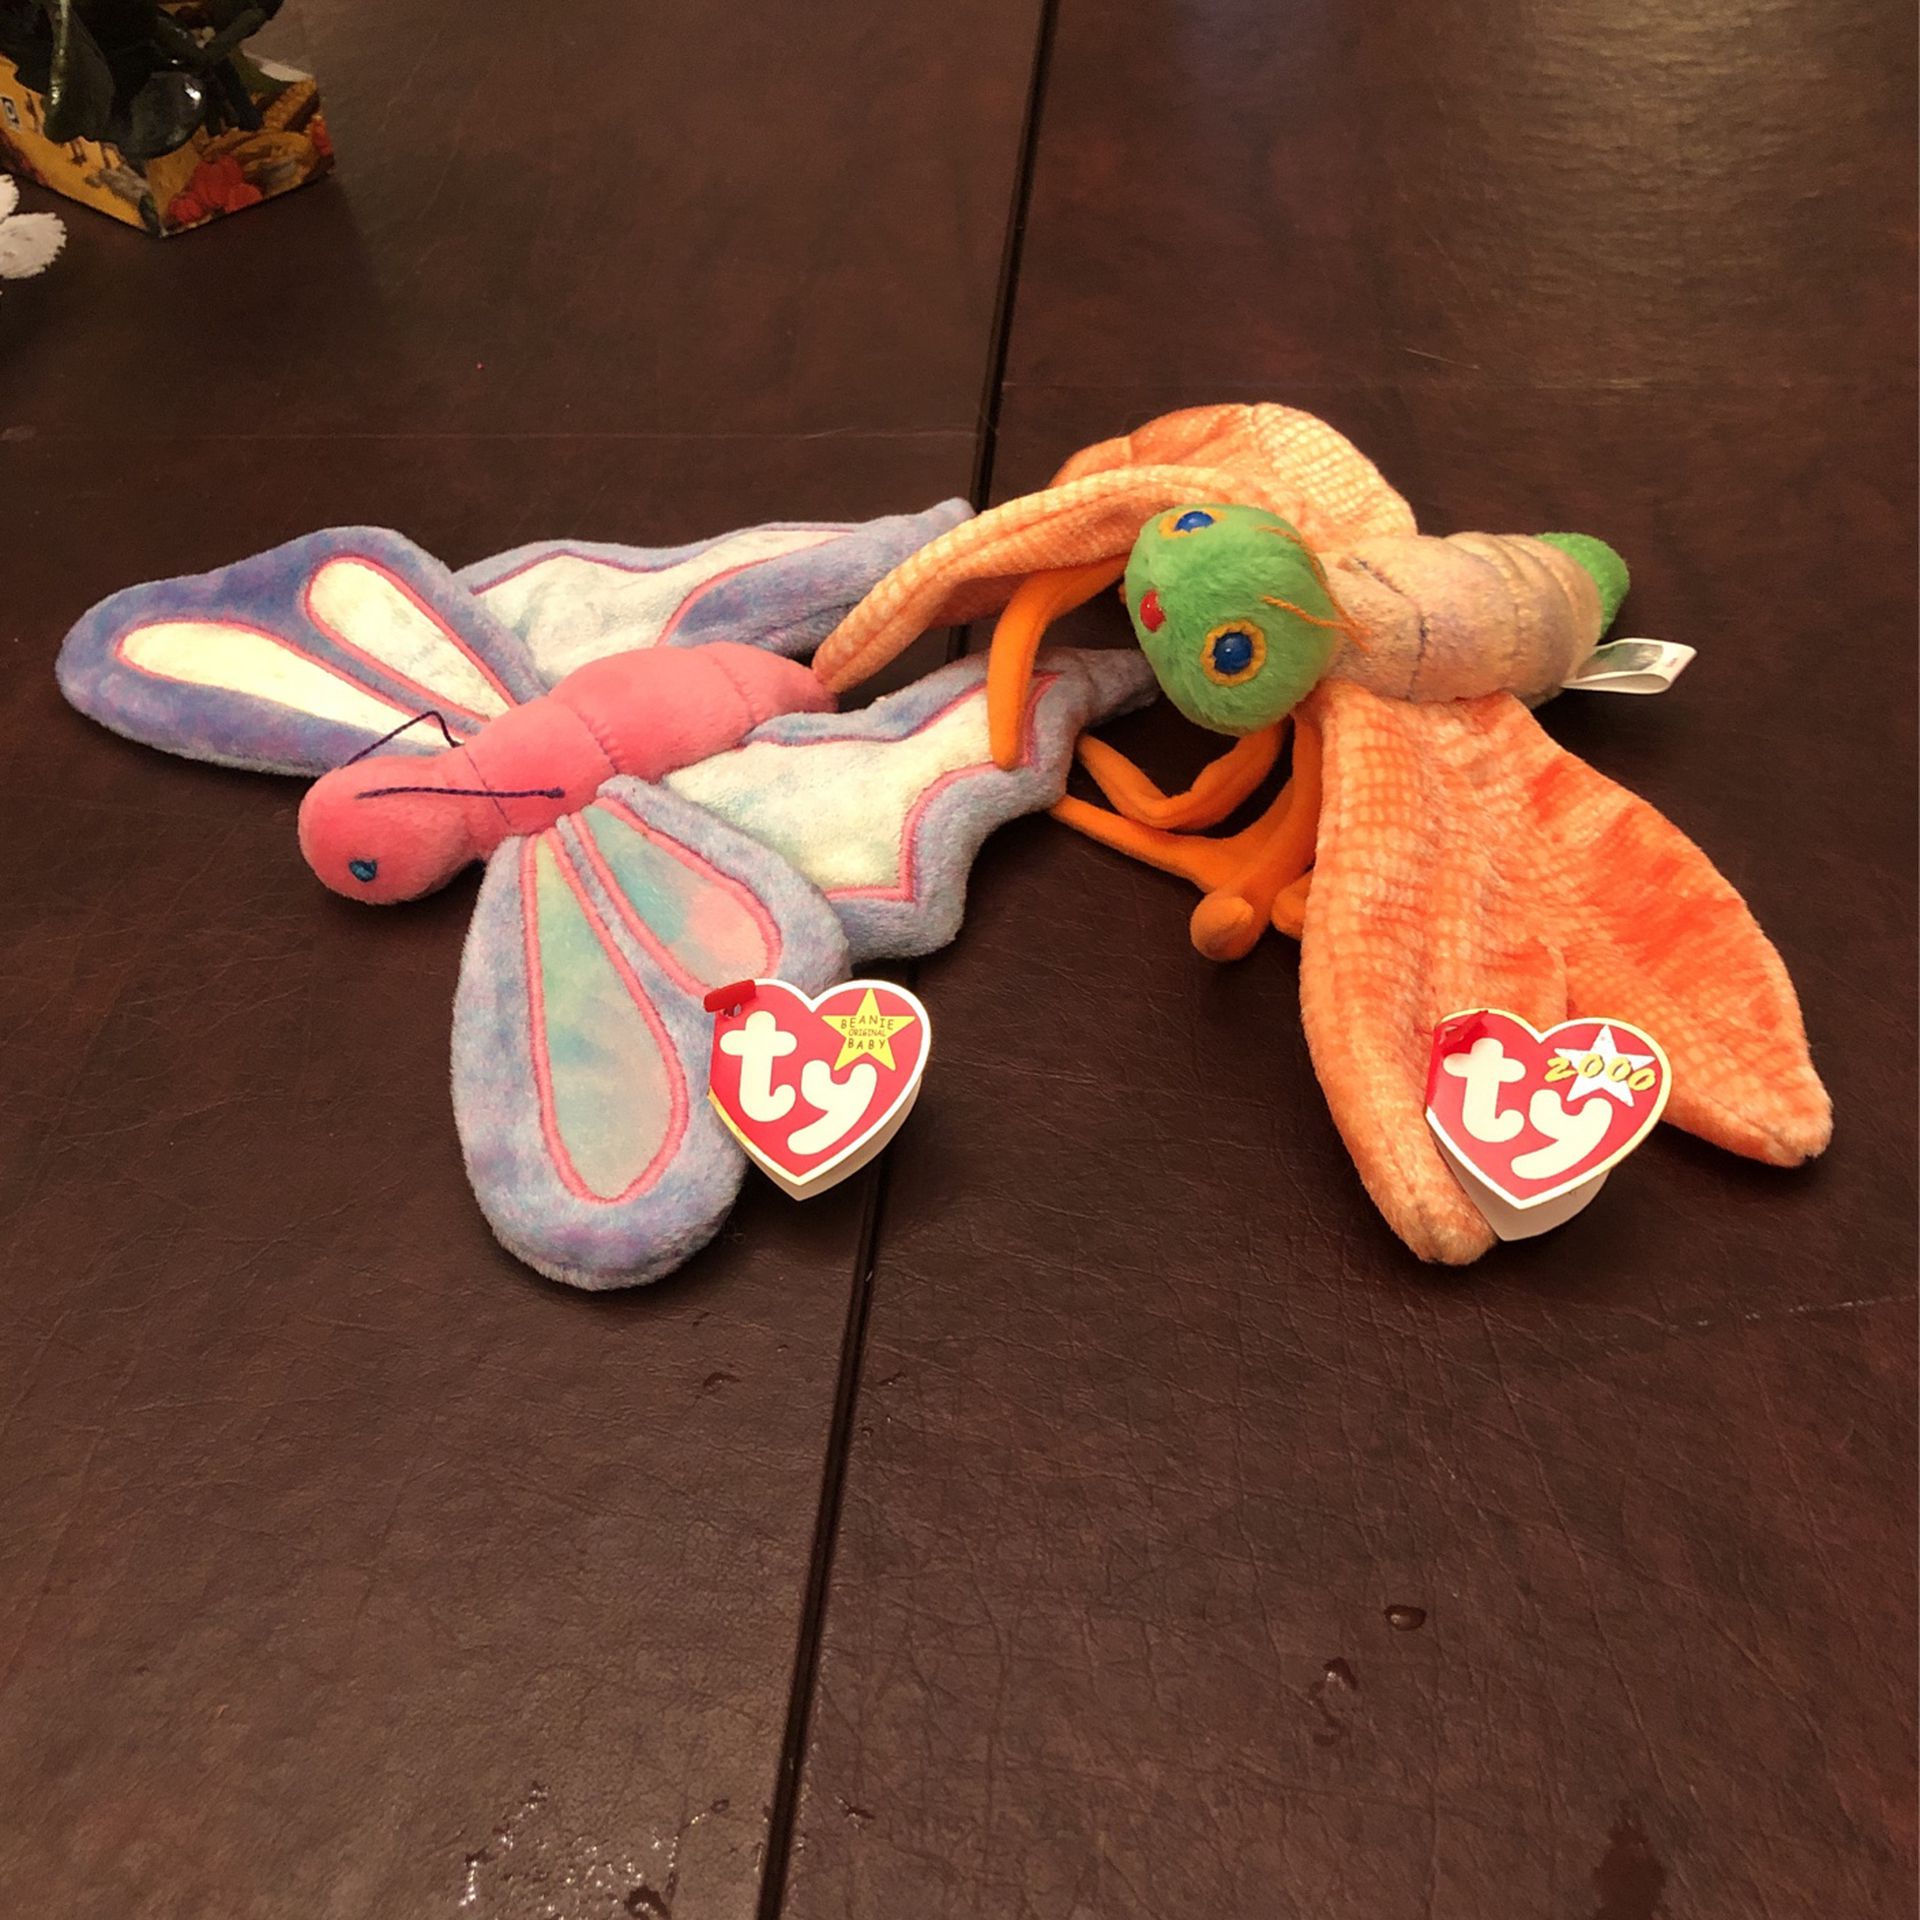 Insects Beanie Babies 